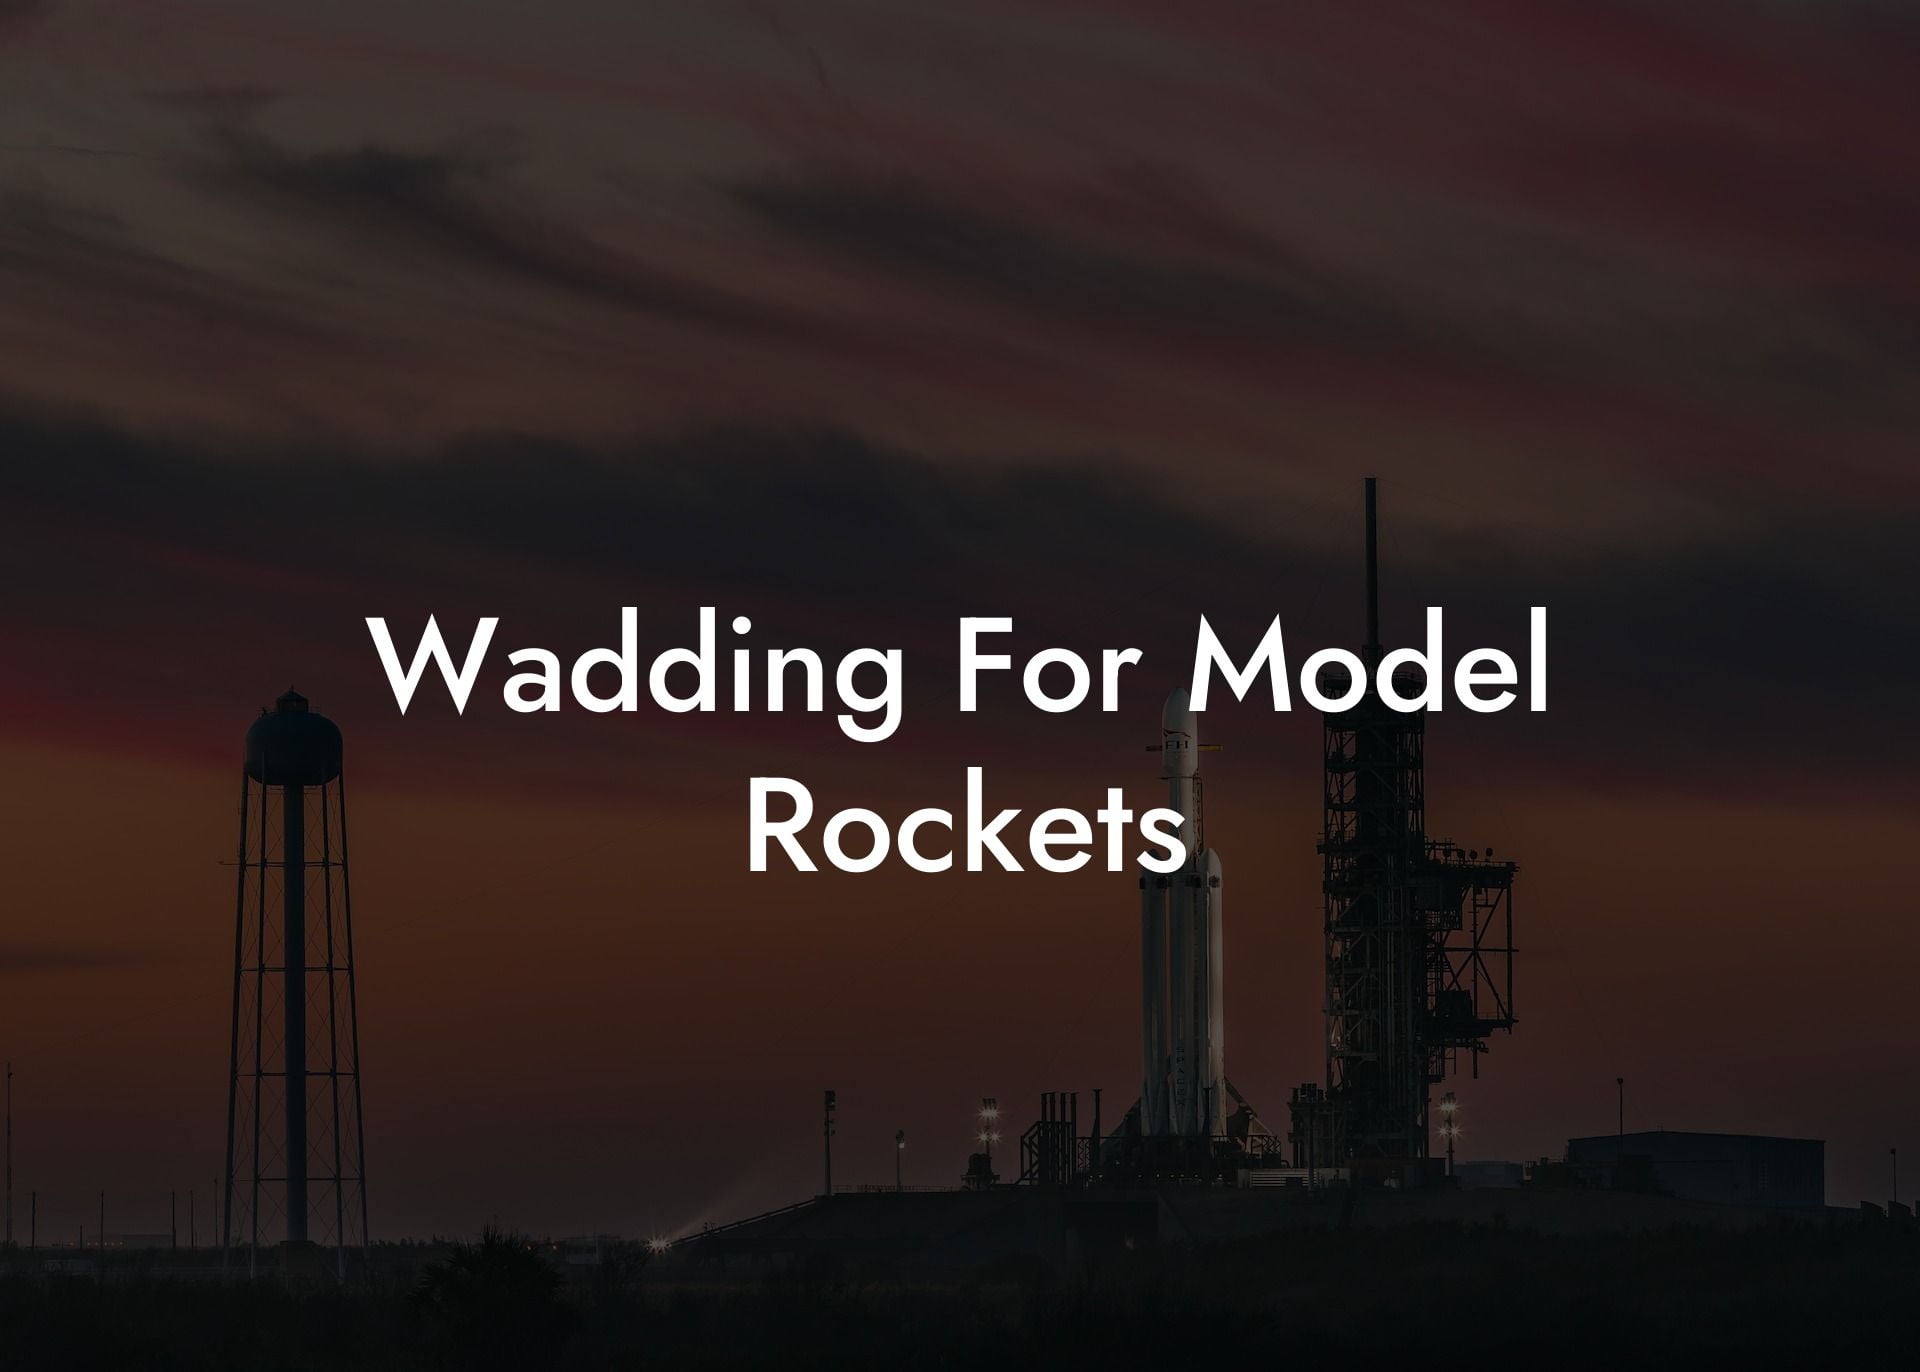 Wadding For Model Rockets